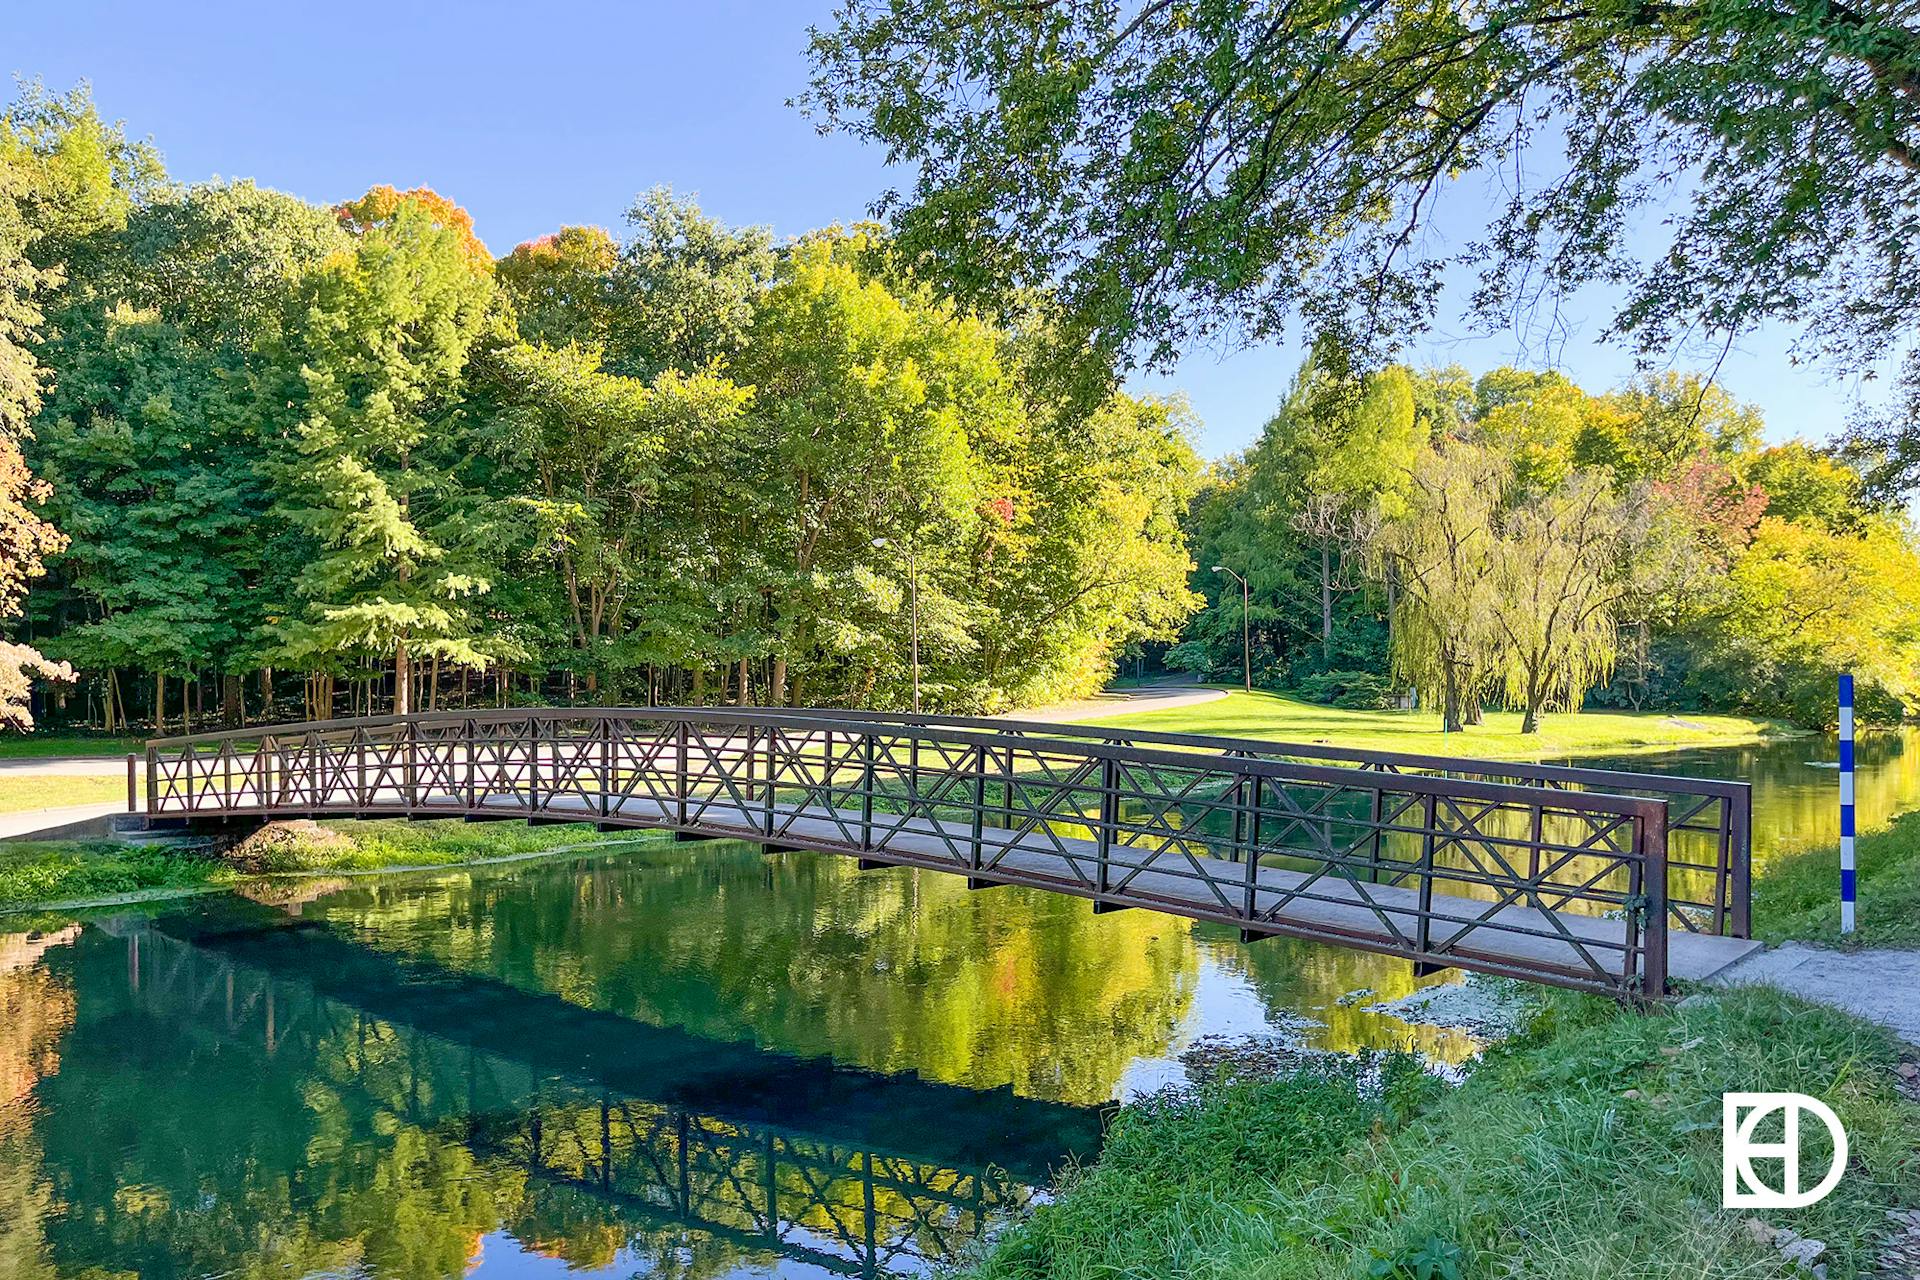 Photo of bridge over the canal in Holcomb Gardens